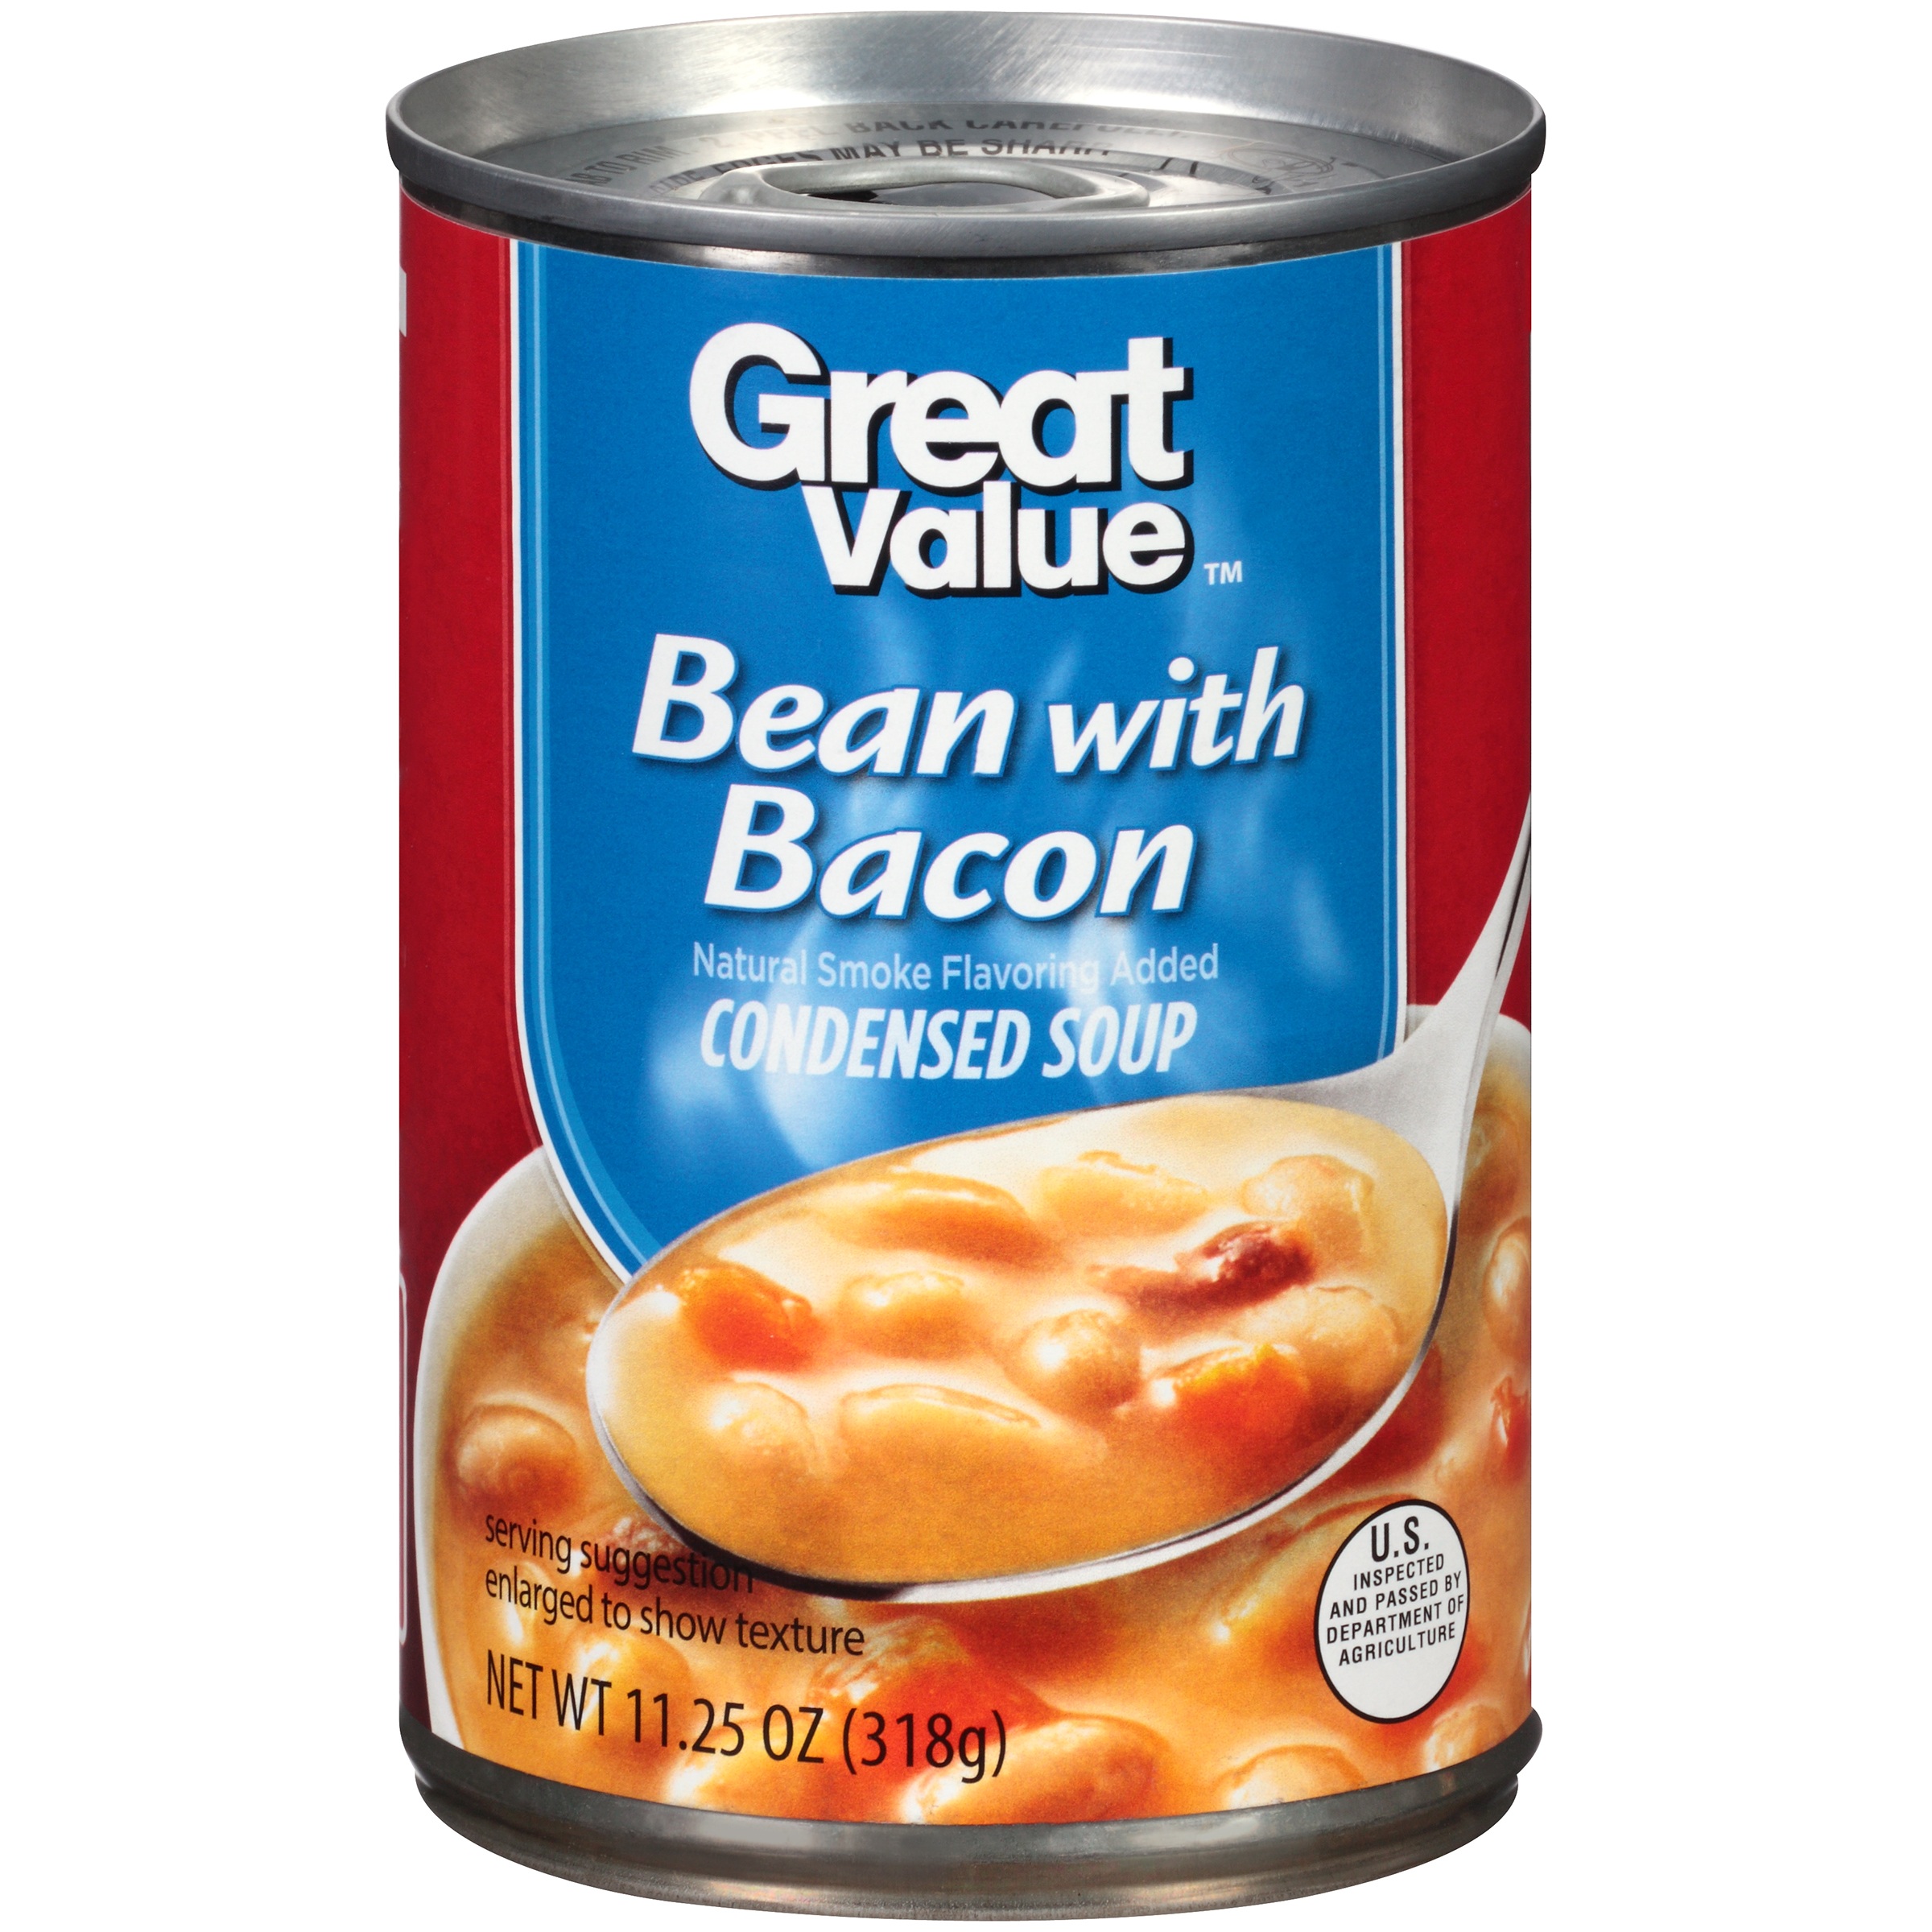 Great Value Bean with Bacon Condensed Soup, 11.25 Oz Image